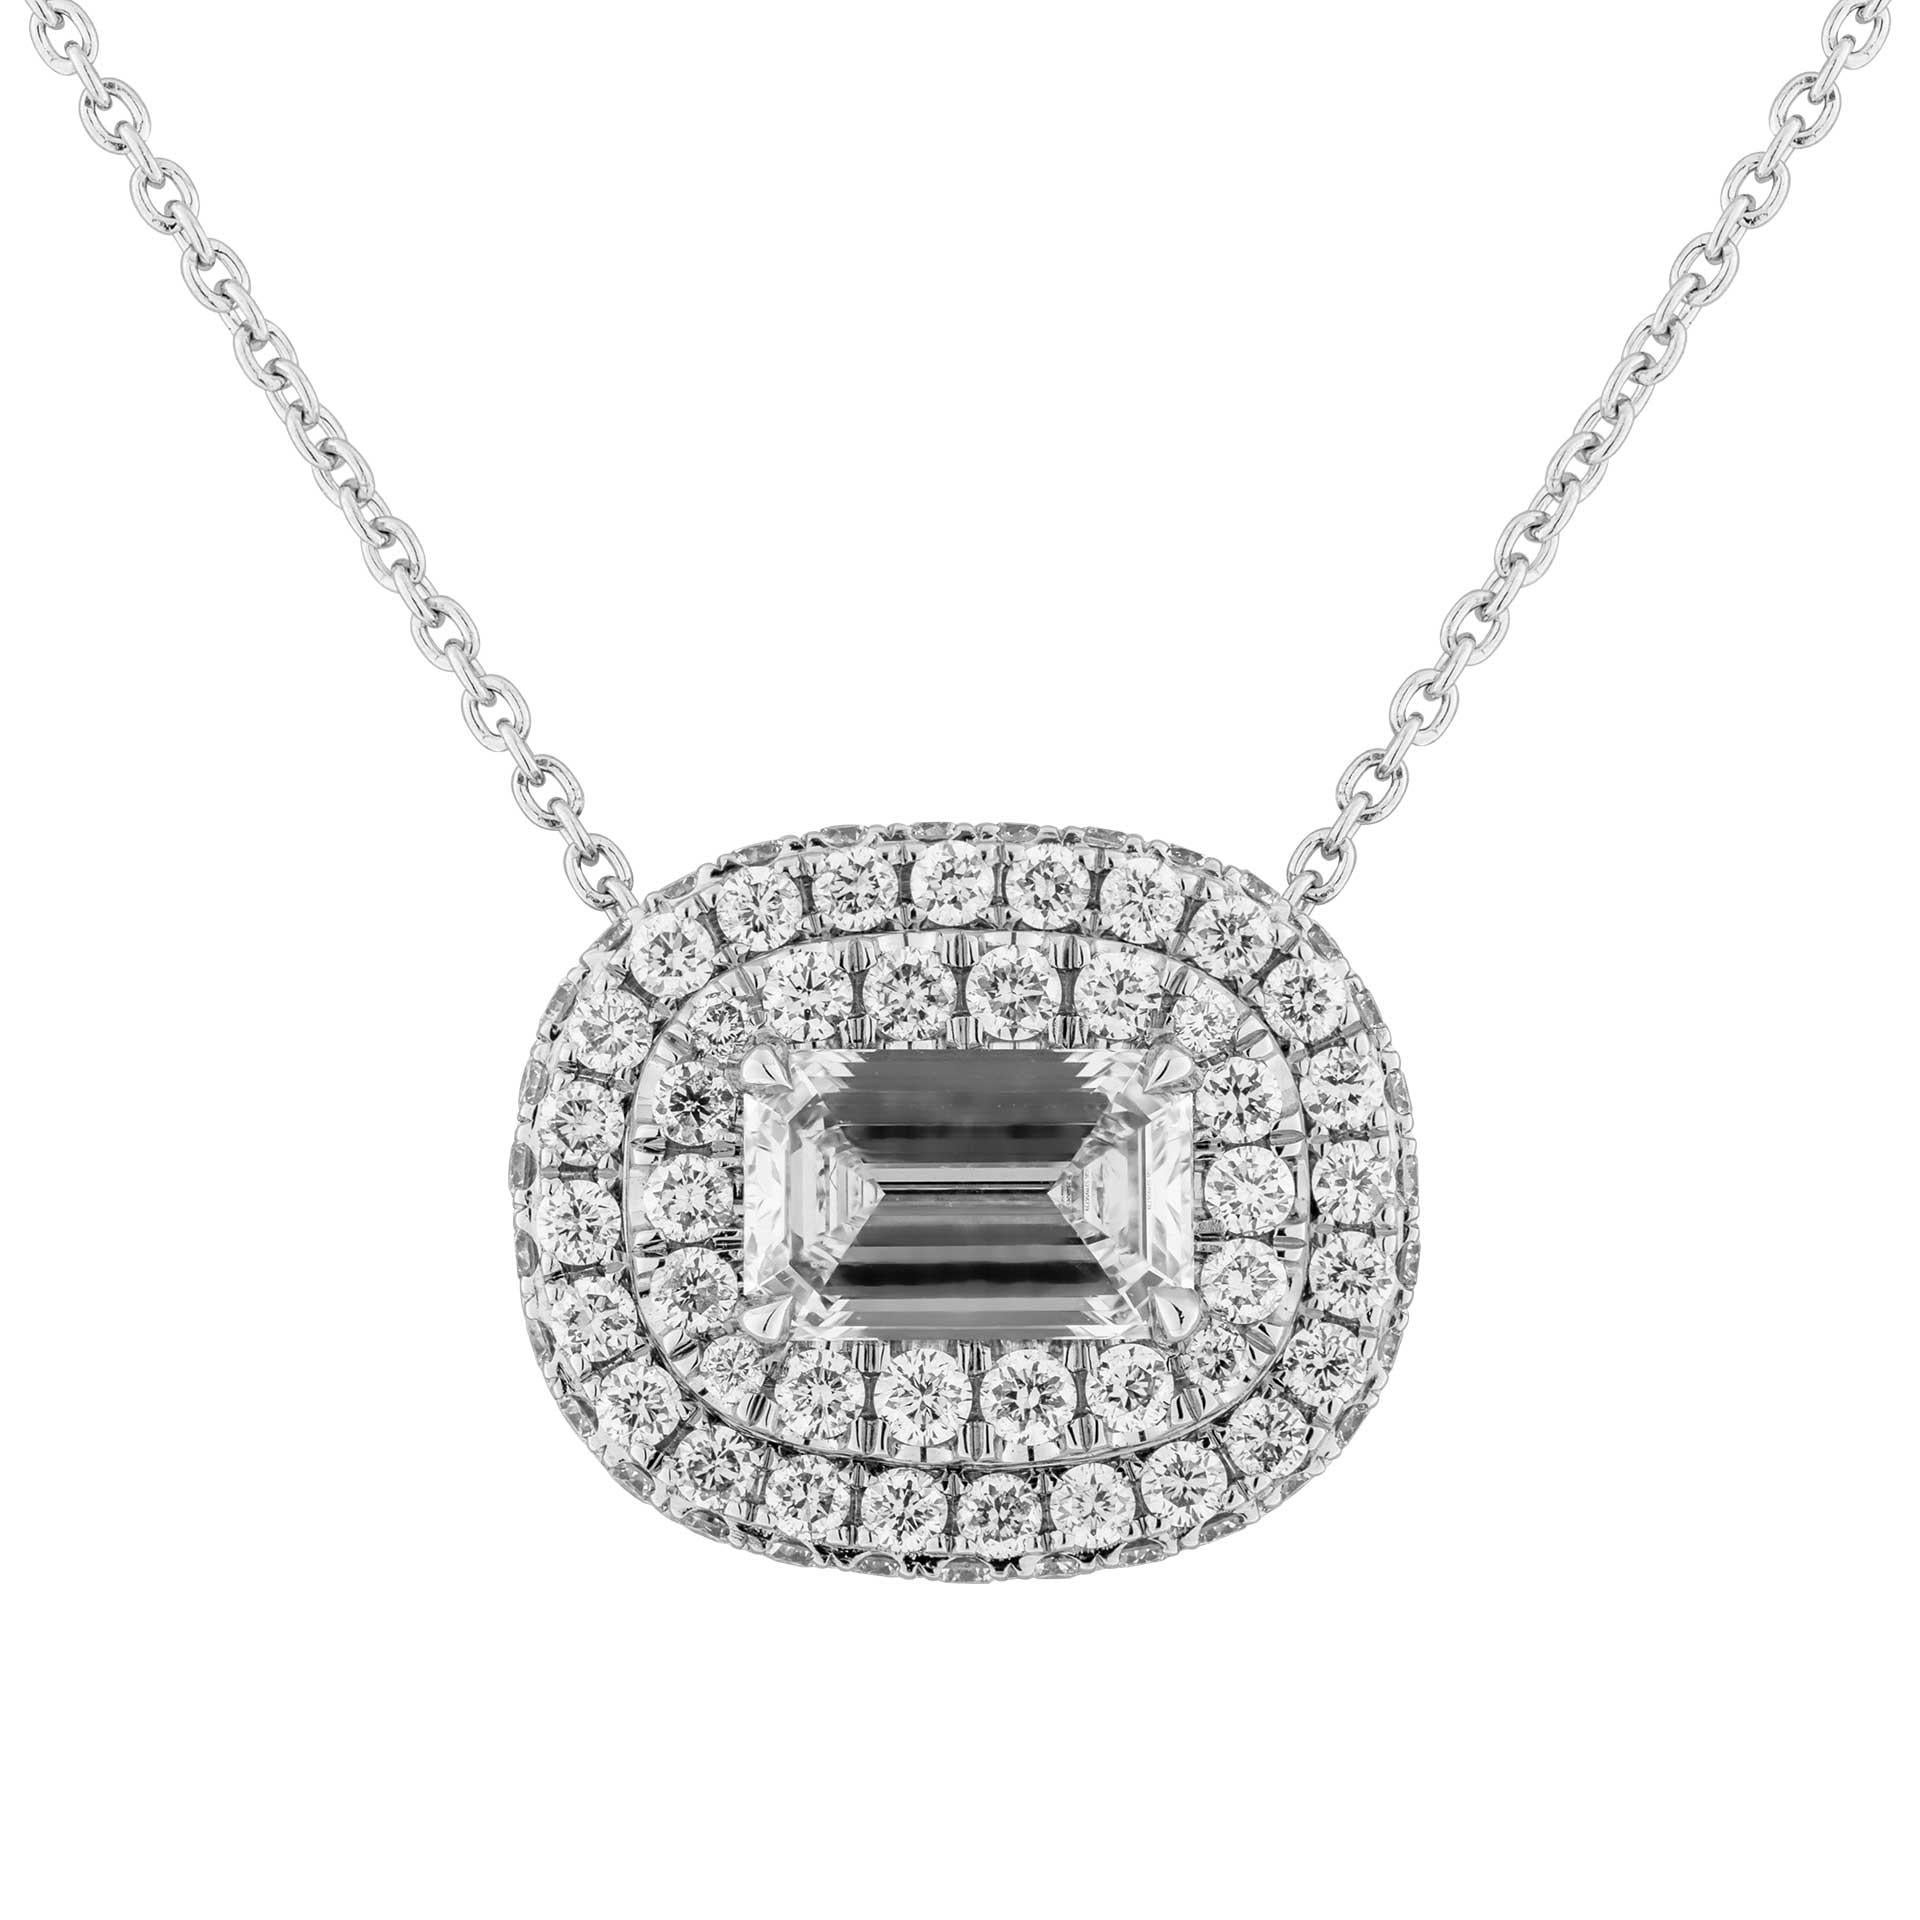 A timeless classic !
Beautiful Oval Diamond Pendant with 2 rows of white diamond halo around to highlight the beauty of the stone, totaling 0.55ct of full brilliant cut round diamonds mounted in Platinum950 

Center stone:  a 0.71ct H VVS1 Emerald